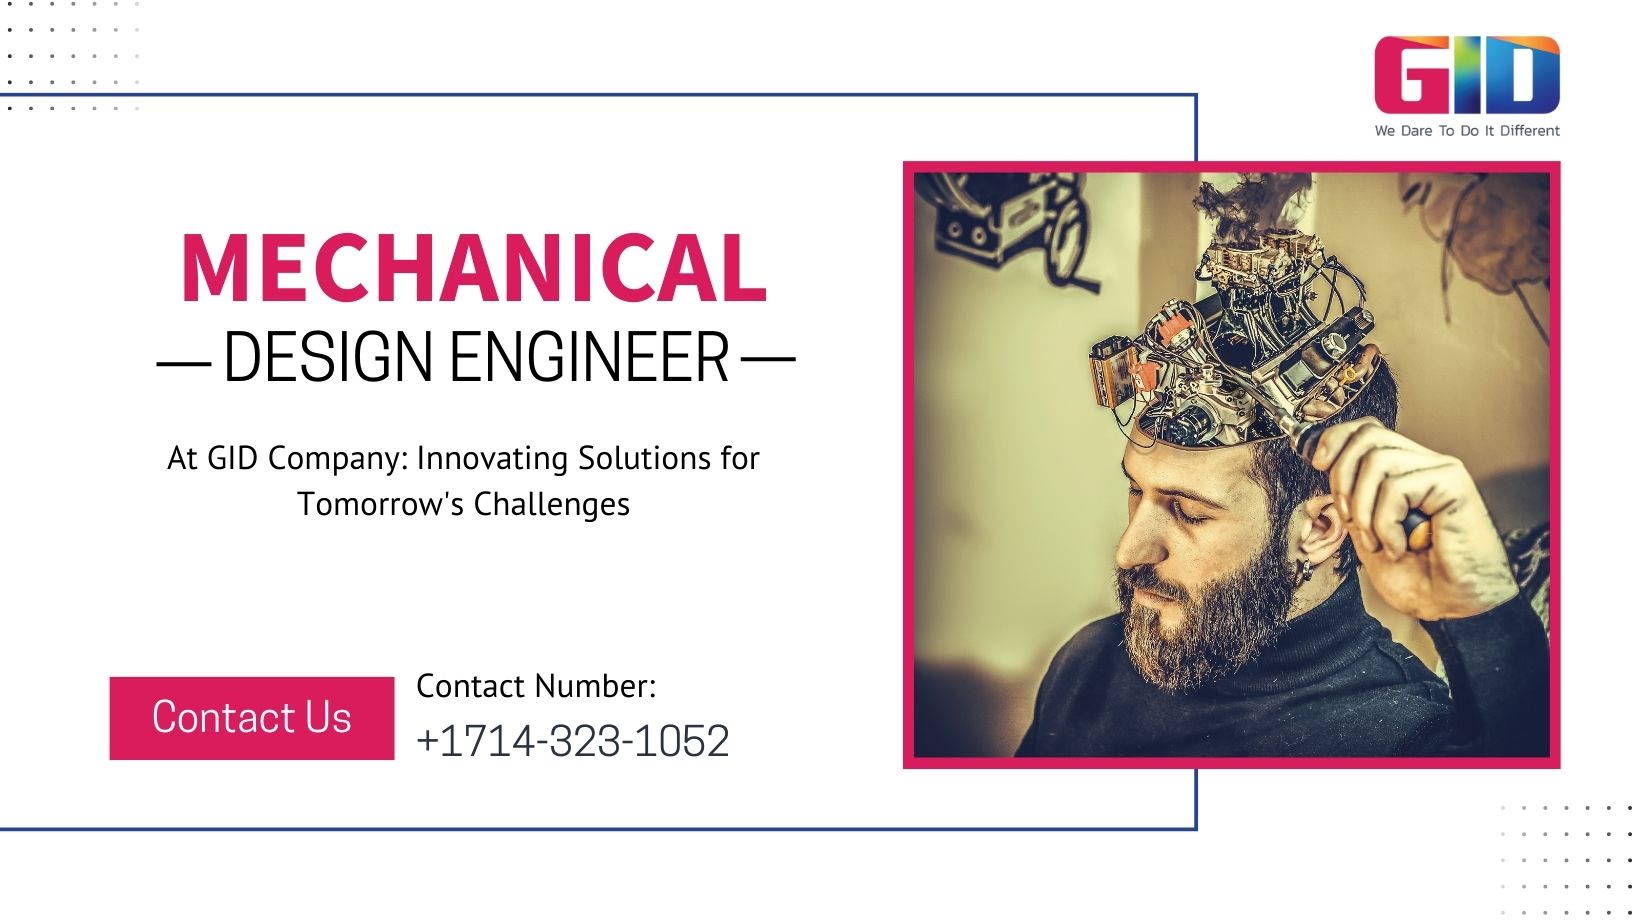 The Role of a Mechanical Design Engineer